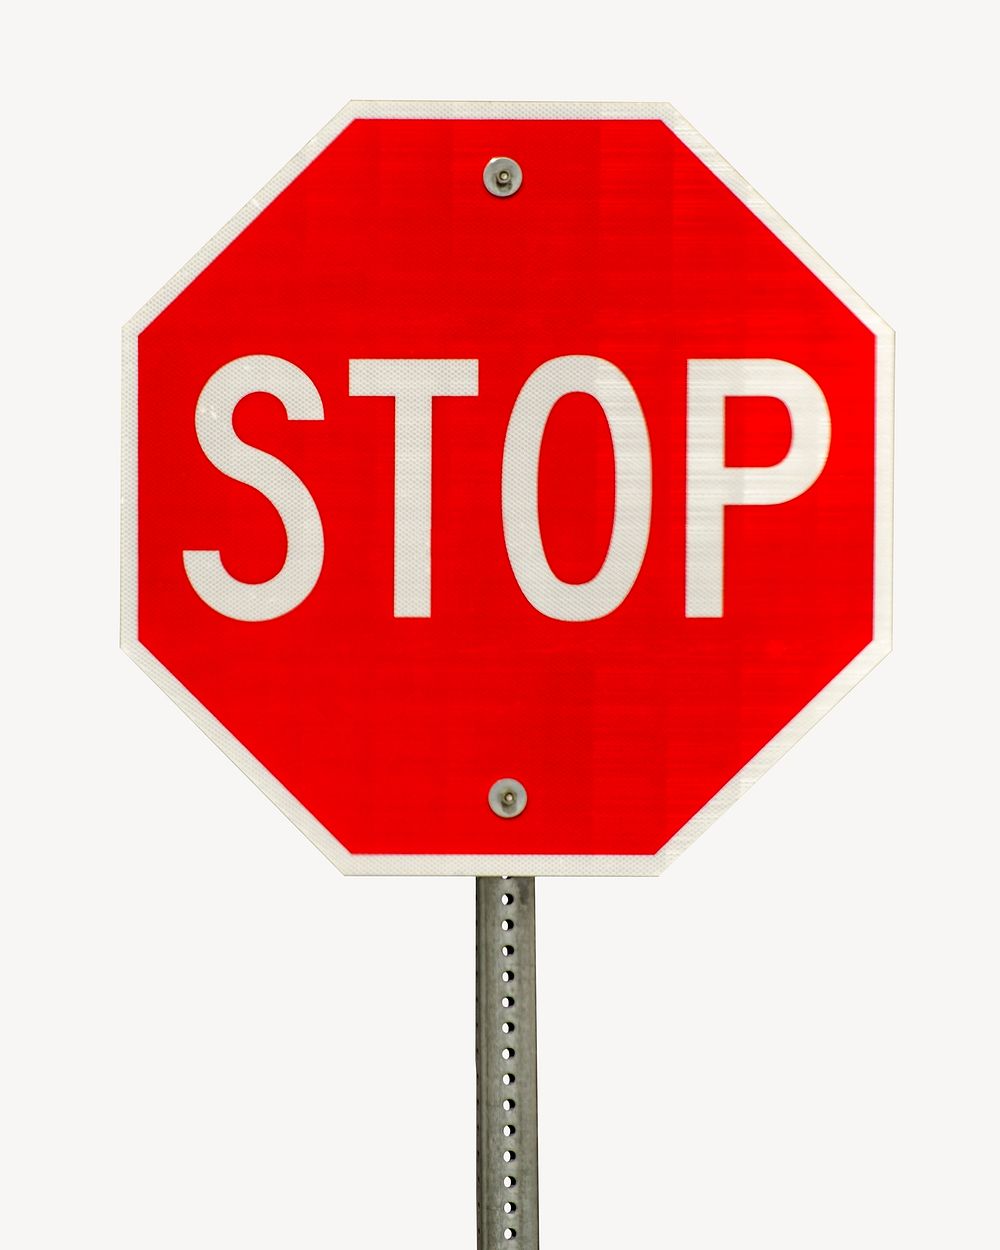 Road stop sign, isolated image psd